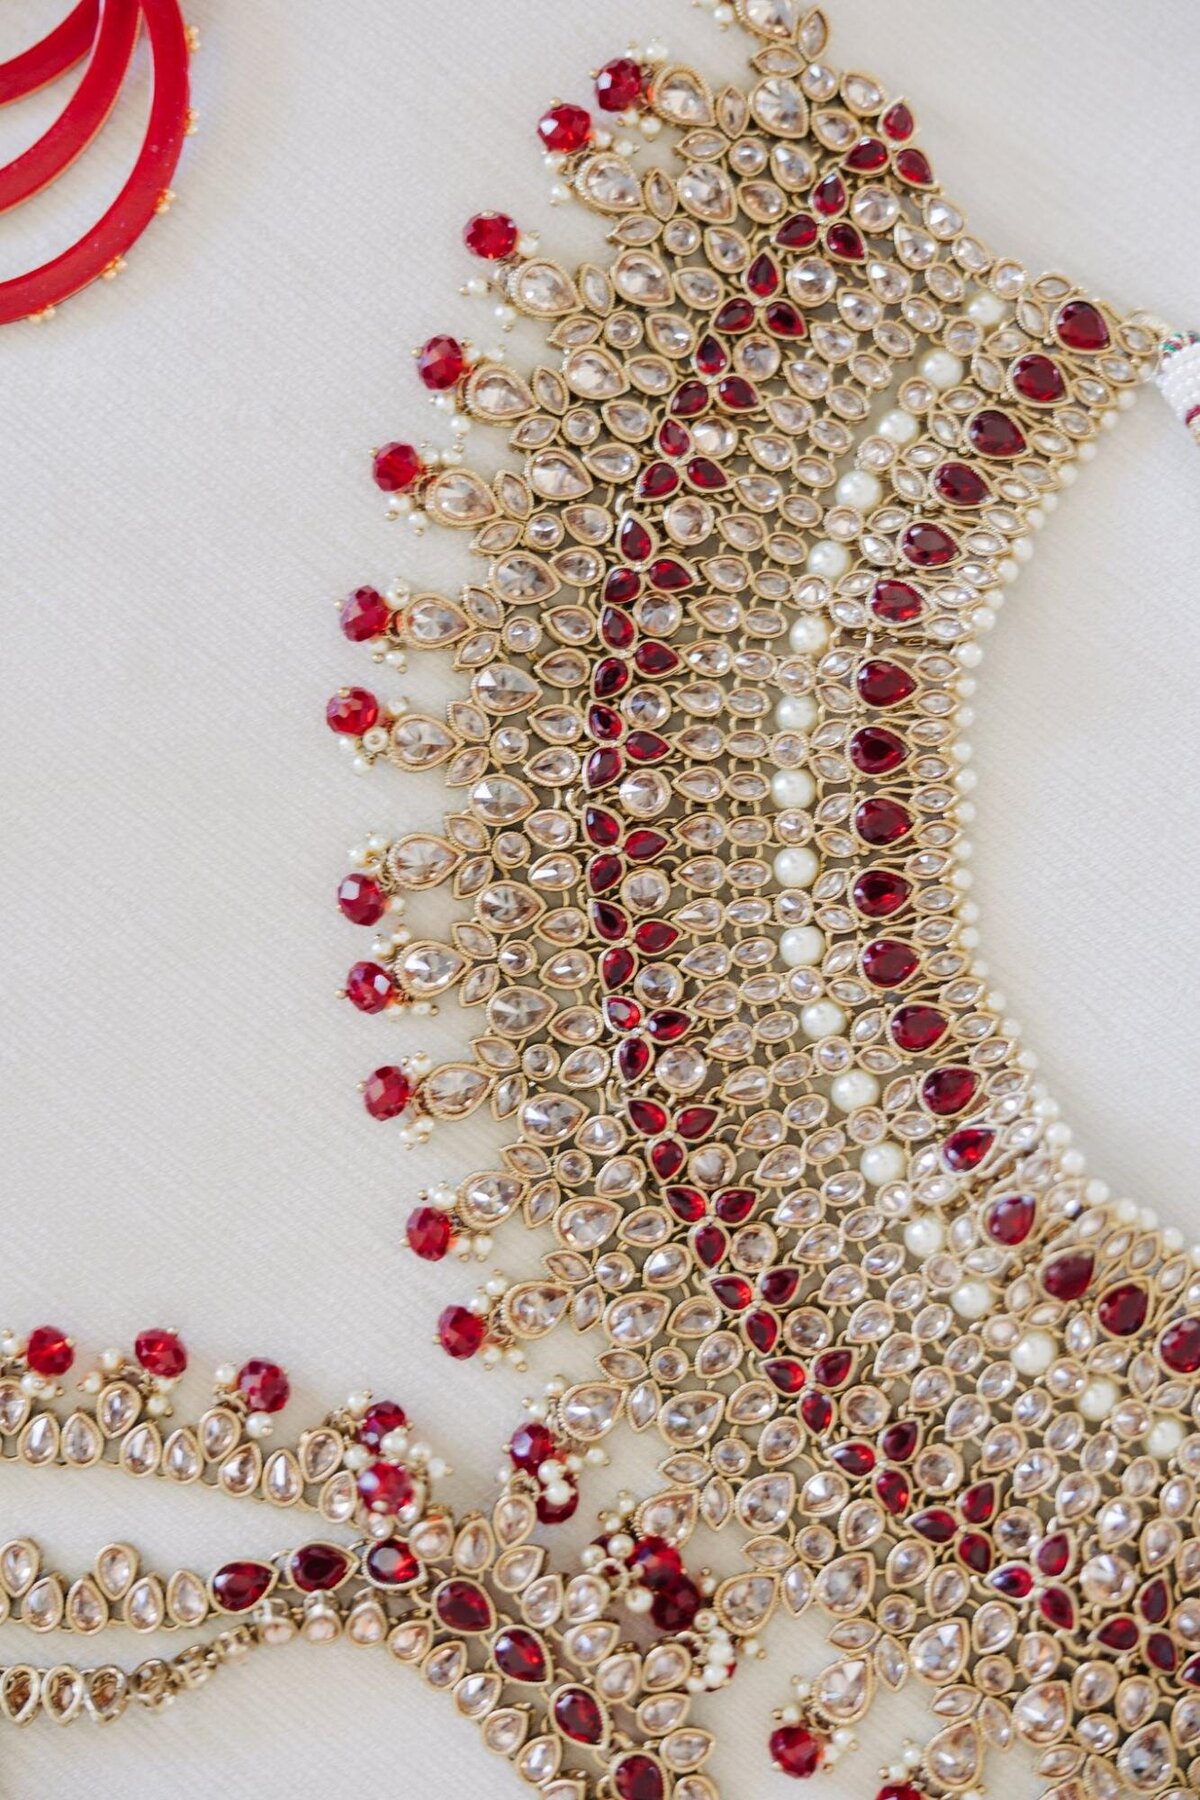 Detailed close-up of an intricate beaded and jeweled embroidery on fabric, featuring gold beads and red gemstones.